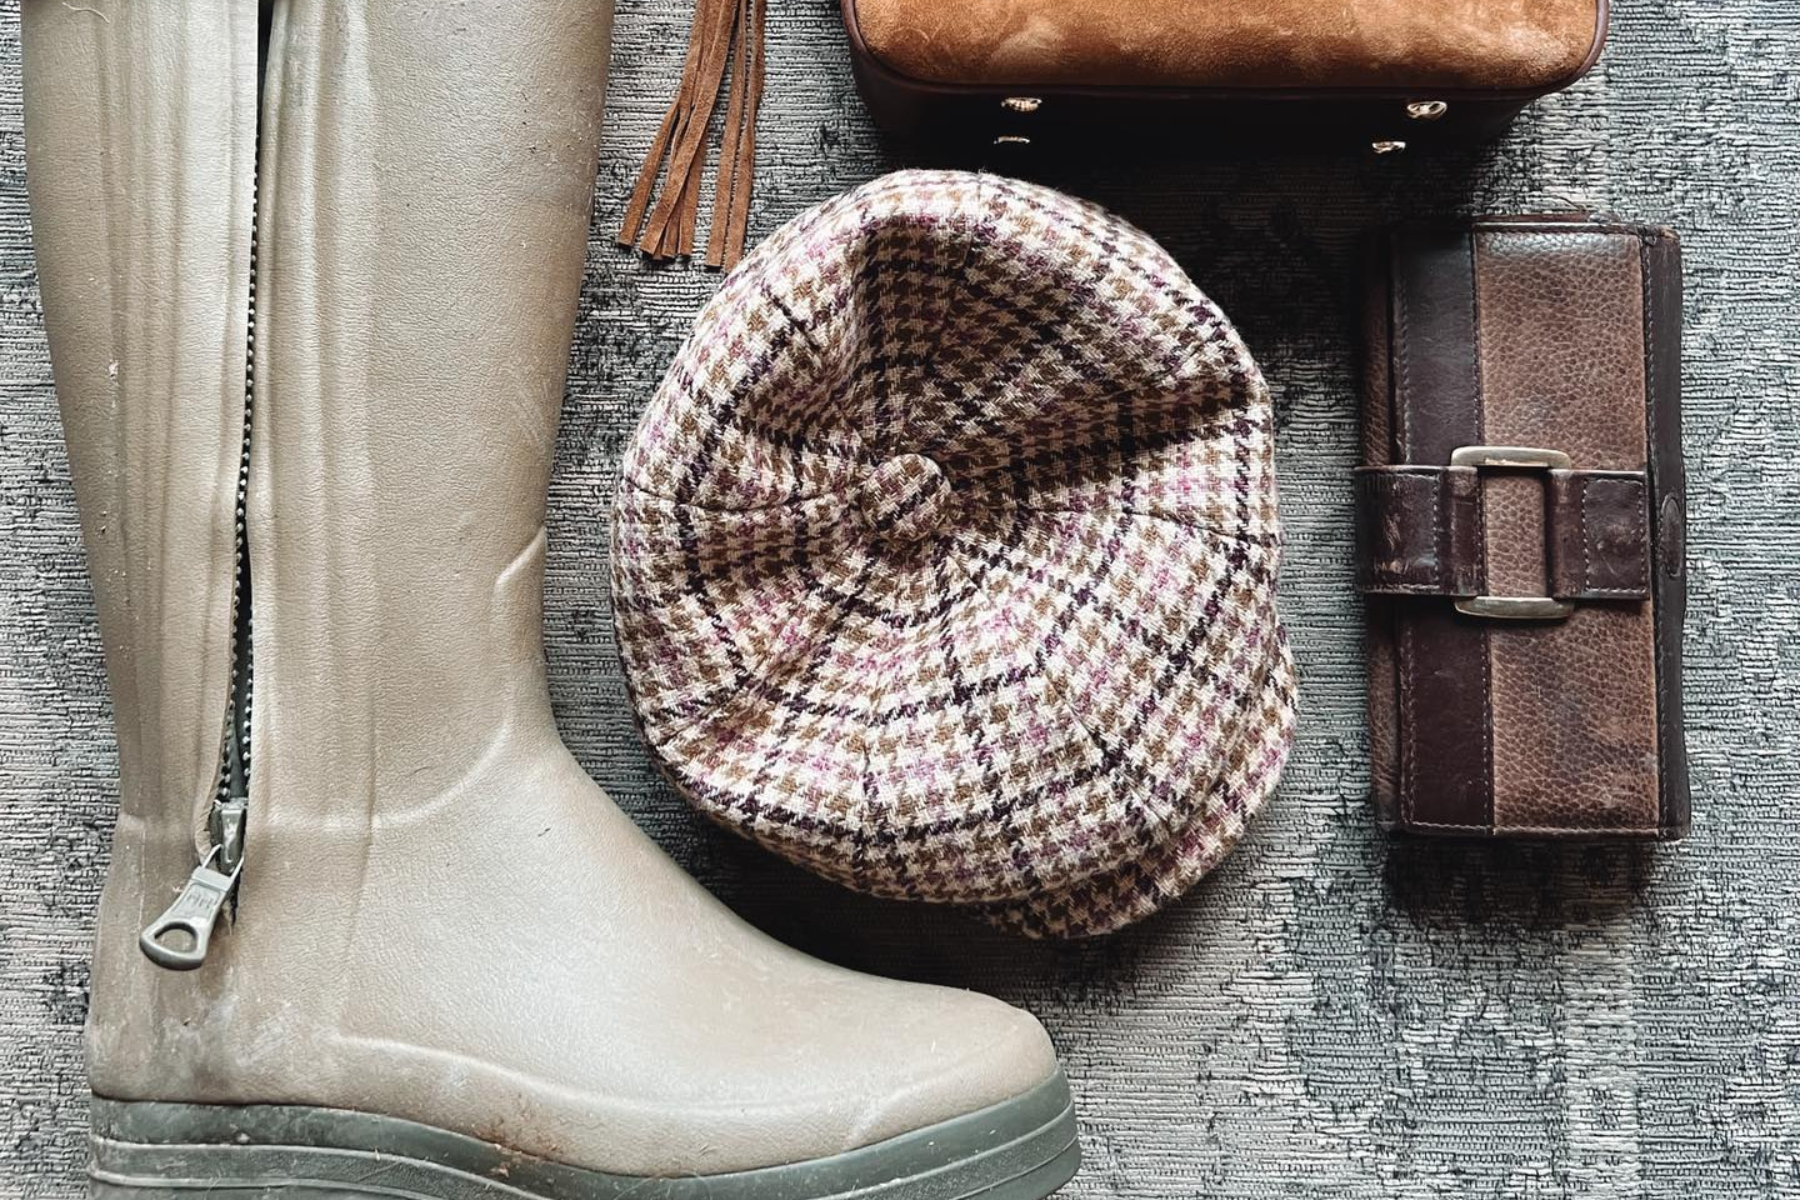 A view of country shoes and accessories